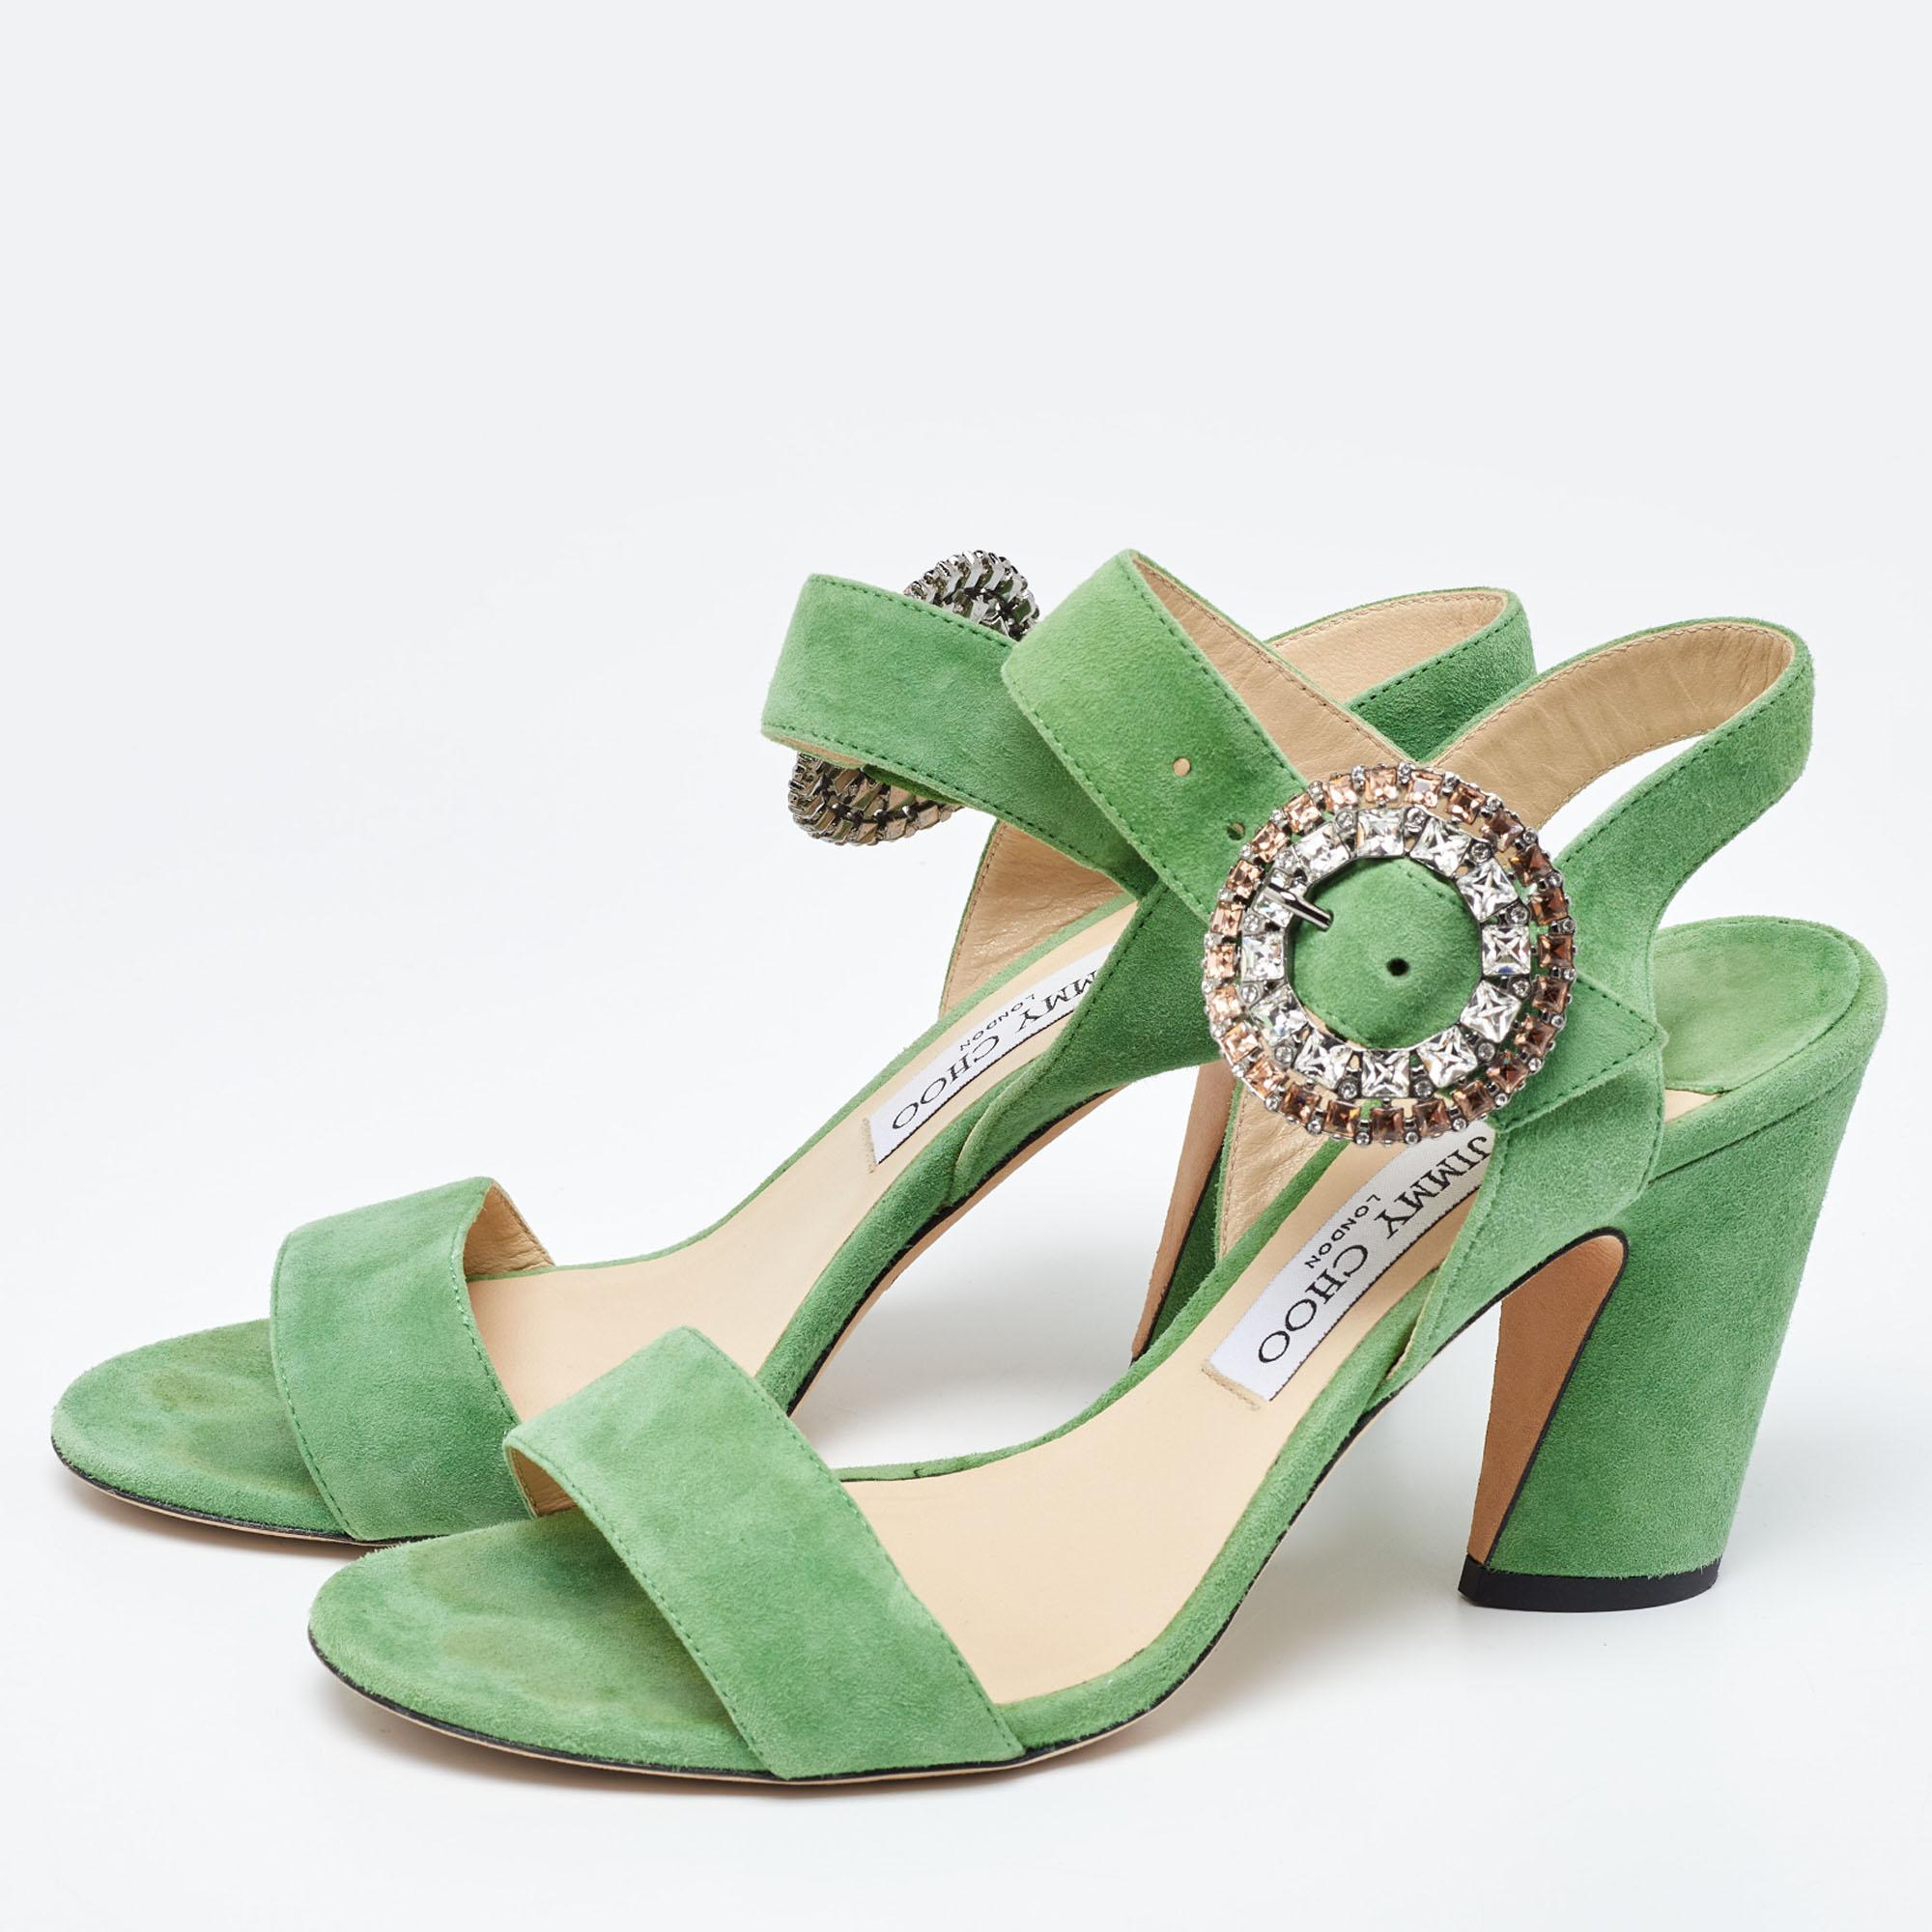 Jimmy Choo Green Suede Ankle Strap Sandals Size 38.5 For Sale 3